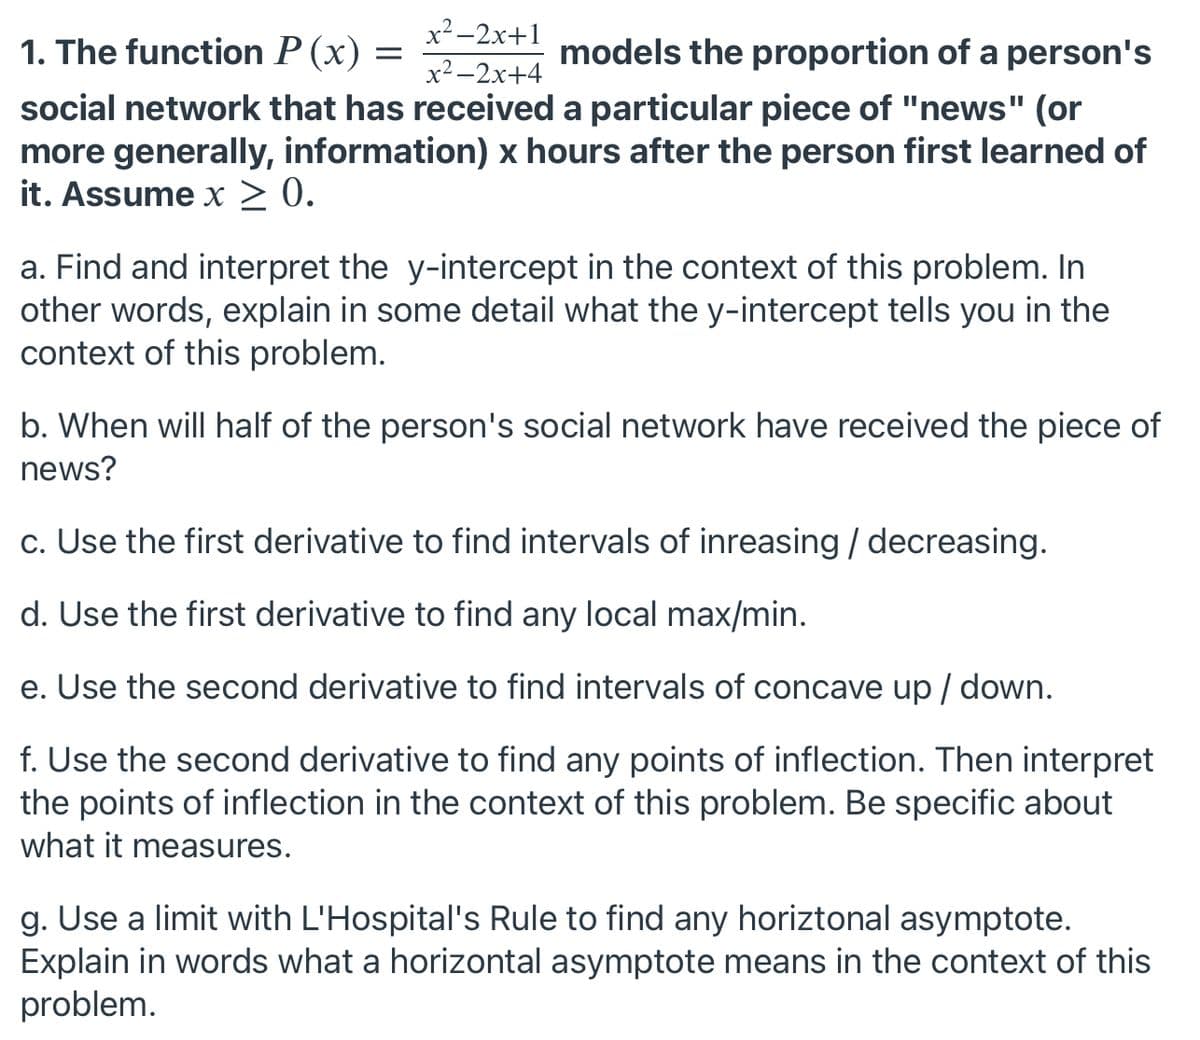 x²-2x+1
1. The function P (x)
models the proportion of a person's
x2 -2x+4
social network that has received a particular piece of "news" (or
more generally, information) x hours after the person first learned of
it. Assume x > 0.
a. Find and interpret the y-intercept in the context of this problem. In
other words, explain in some detail what the y-intercept tells you in the
context of this problem.
b. When will half of the person's social network have received the piece of
news?
c. Use the first derivative to find intervals of inreasing / decreasing.
d. Use the first derivative to find any local max/min.
e. Use the second derivative to find intervals of concave up / down.
f. Use the second derivative to find any points of inflection. Then interpret
the points of inflection in the context of this problem. Be specific about
what it measures.
g. Use a limit with L'Hospital's Rule to find any horiztonal asymptote.
Explain in words what a horizontal asymptote means in the context of this
problem.
